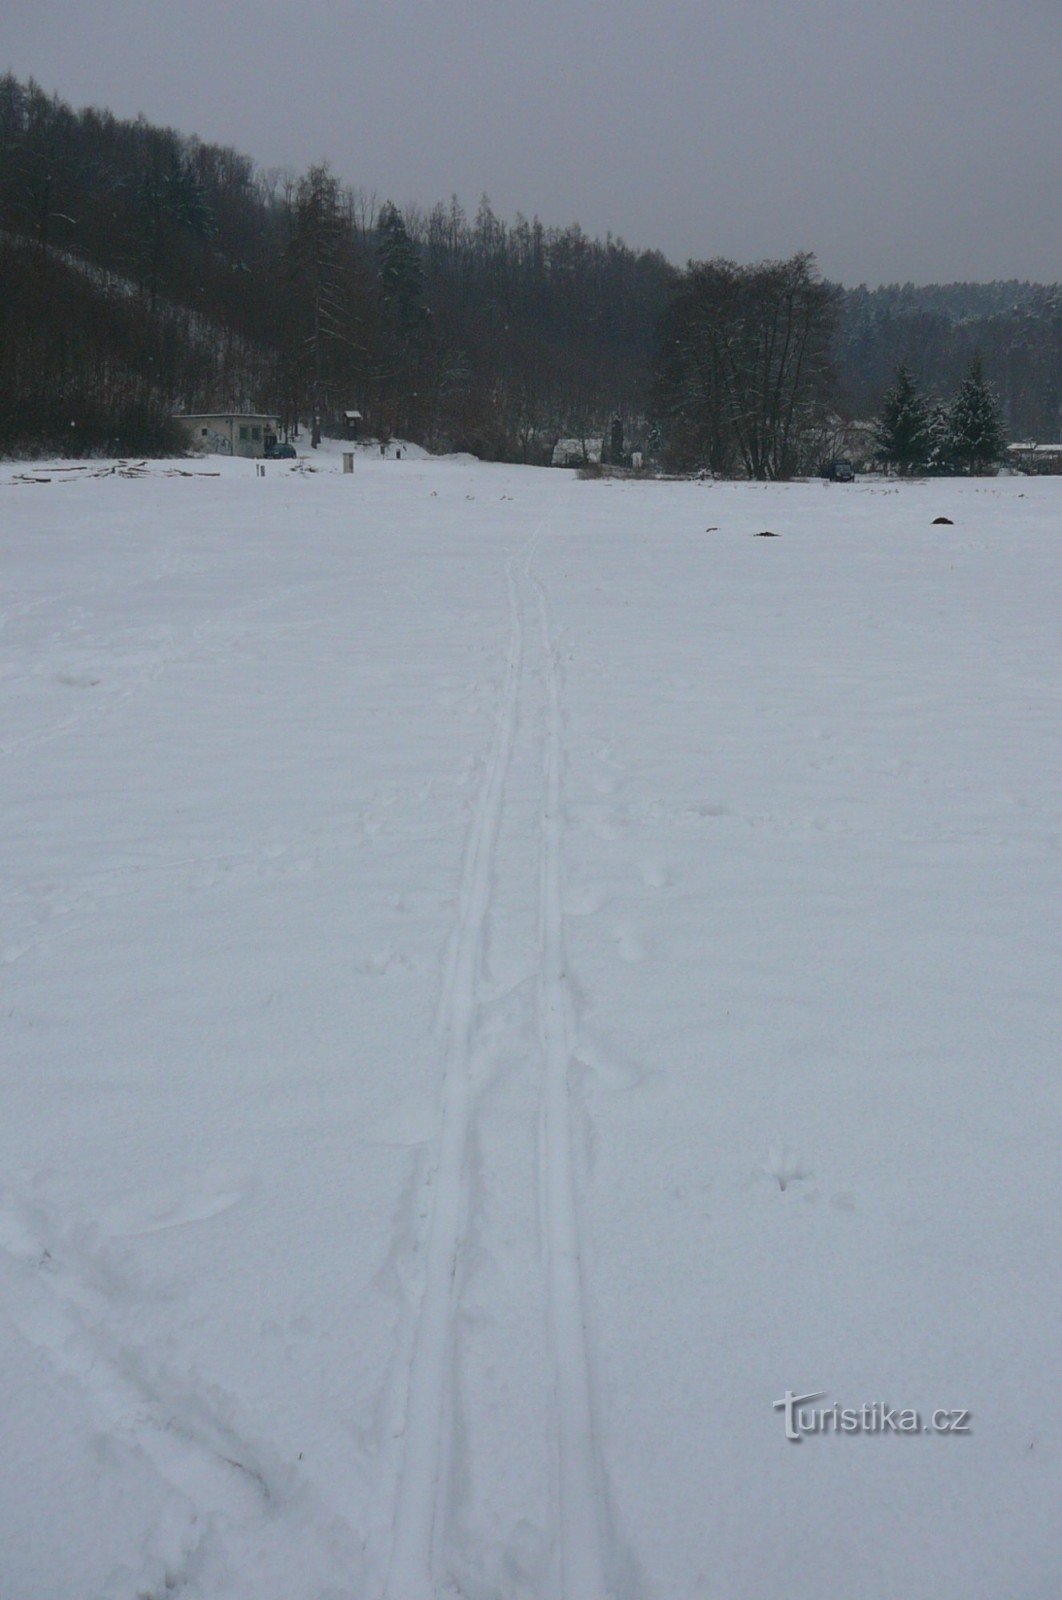 Running track across the meadow